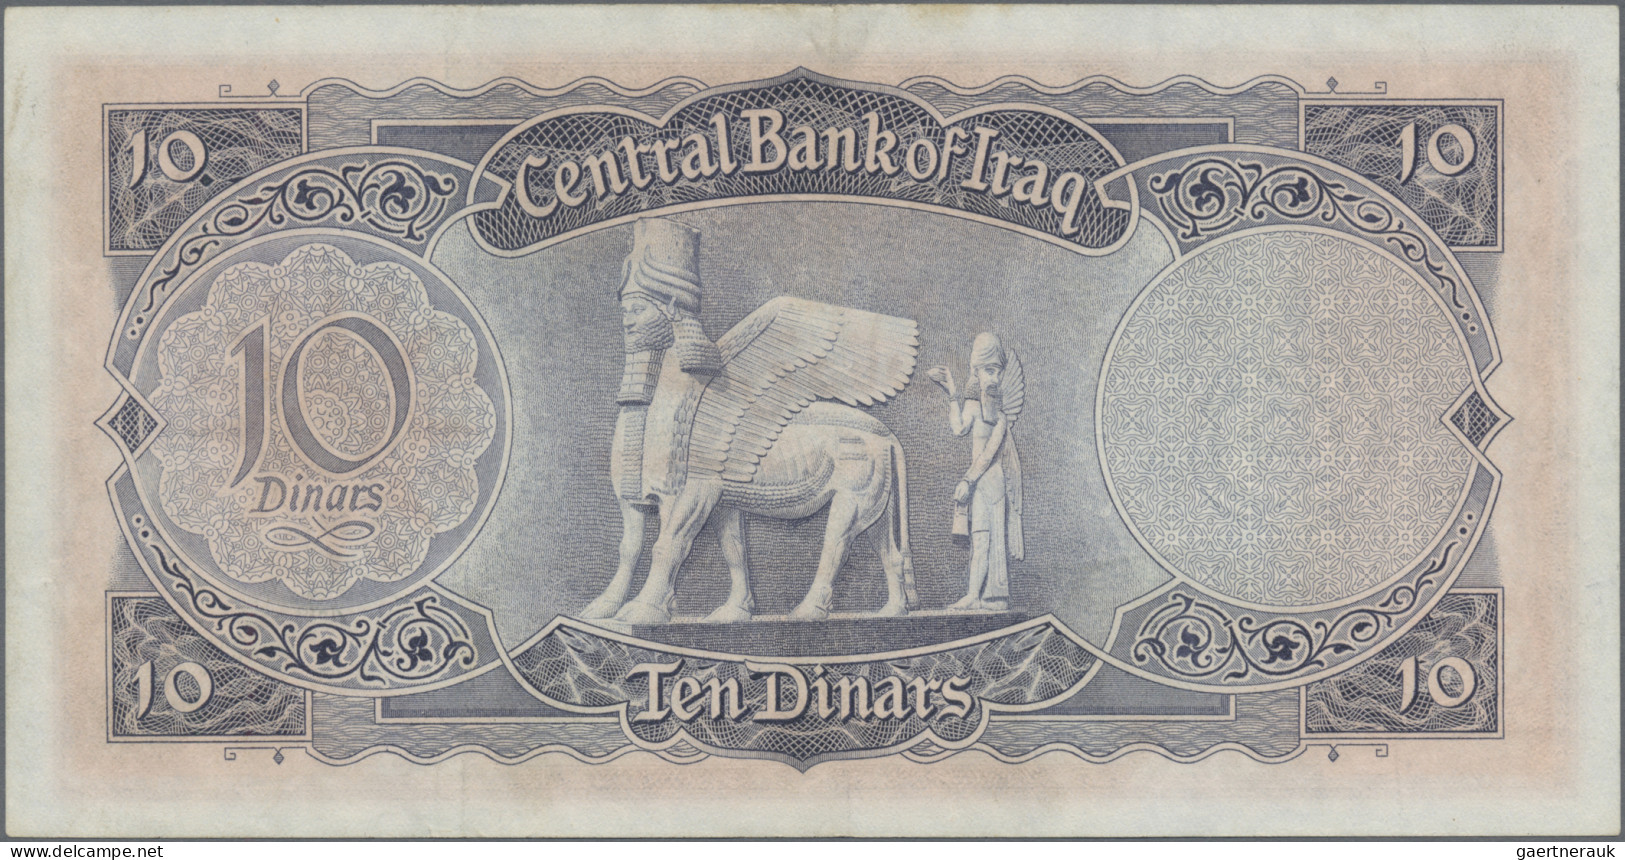 Iraq: Central Bank Of Iraq, Lot With 3 Banknotes, 1, 5 And 10 Dinars 1959, P.53 - Iraq